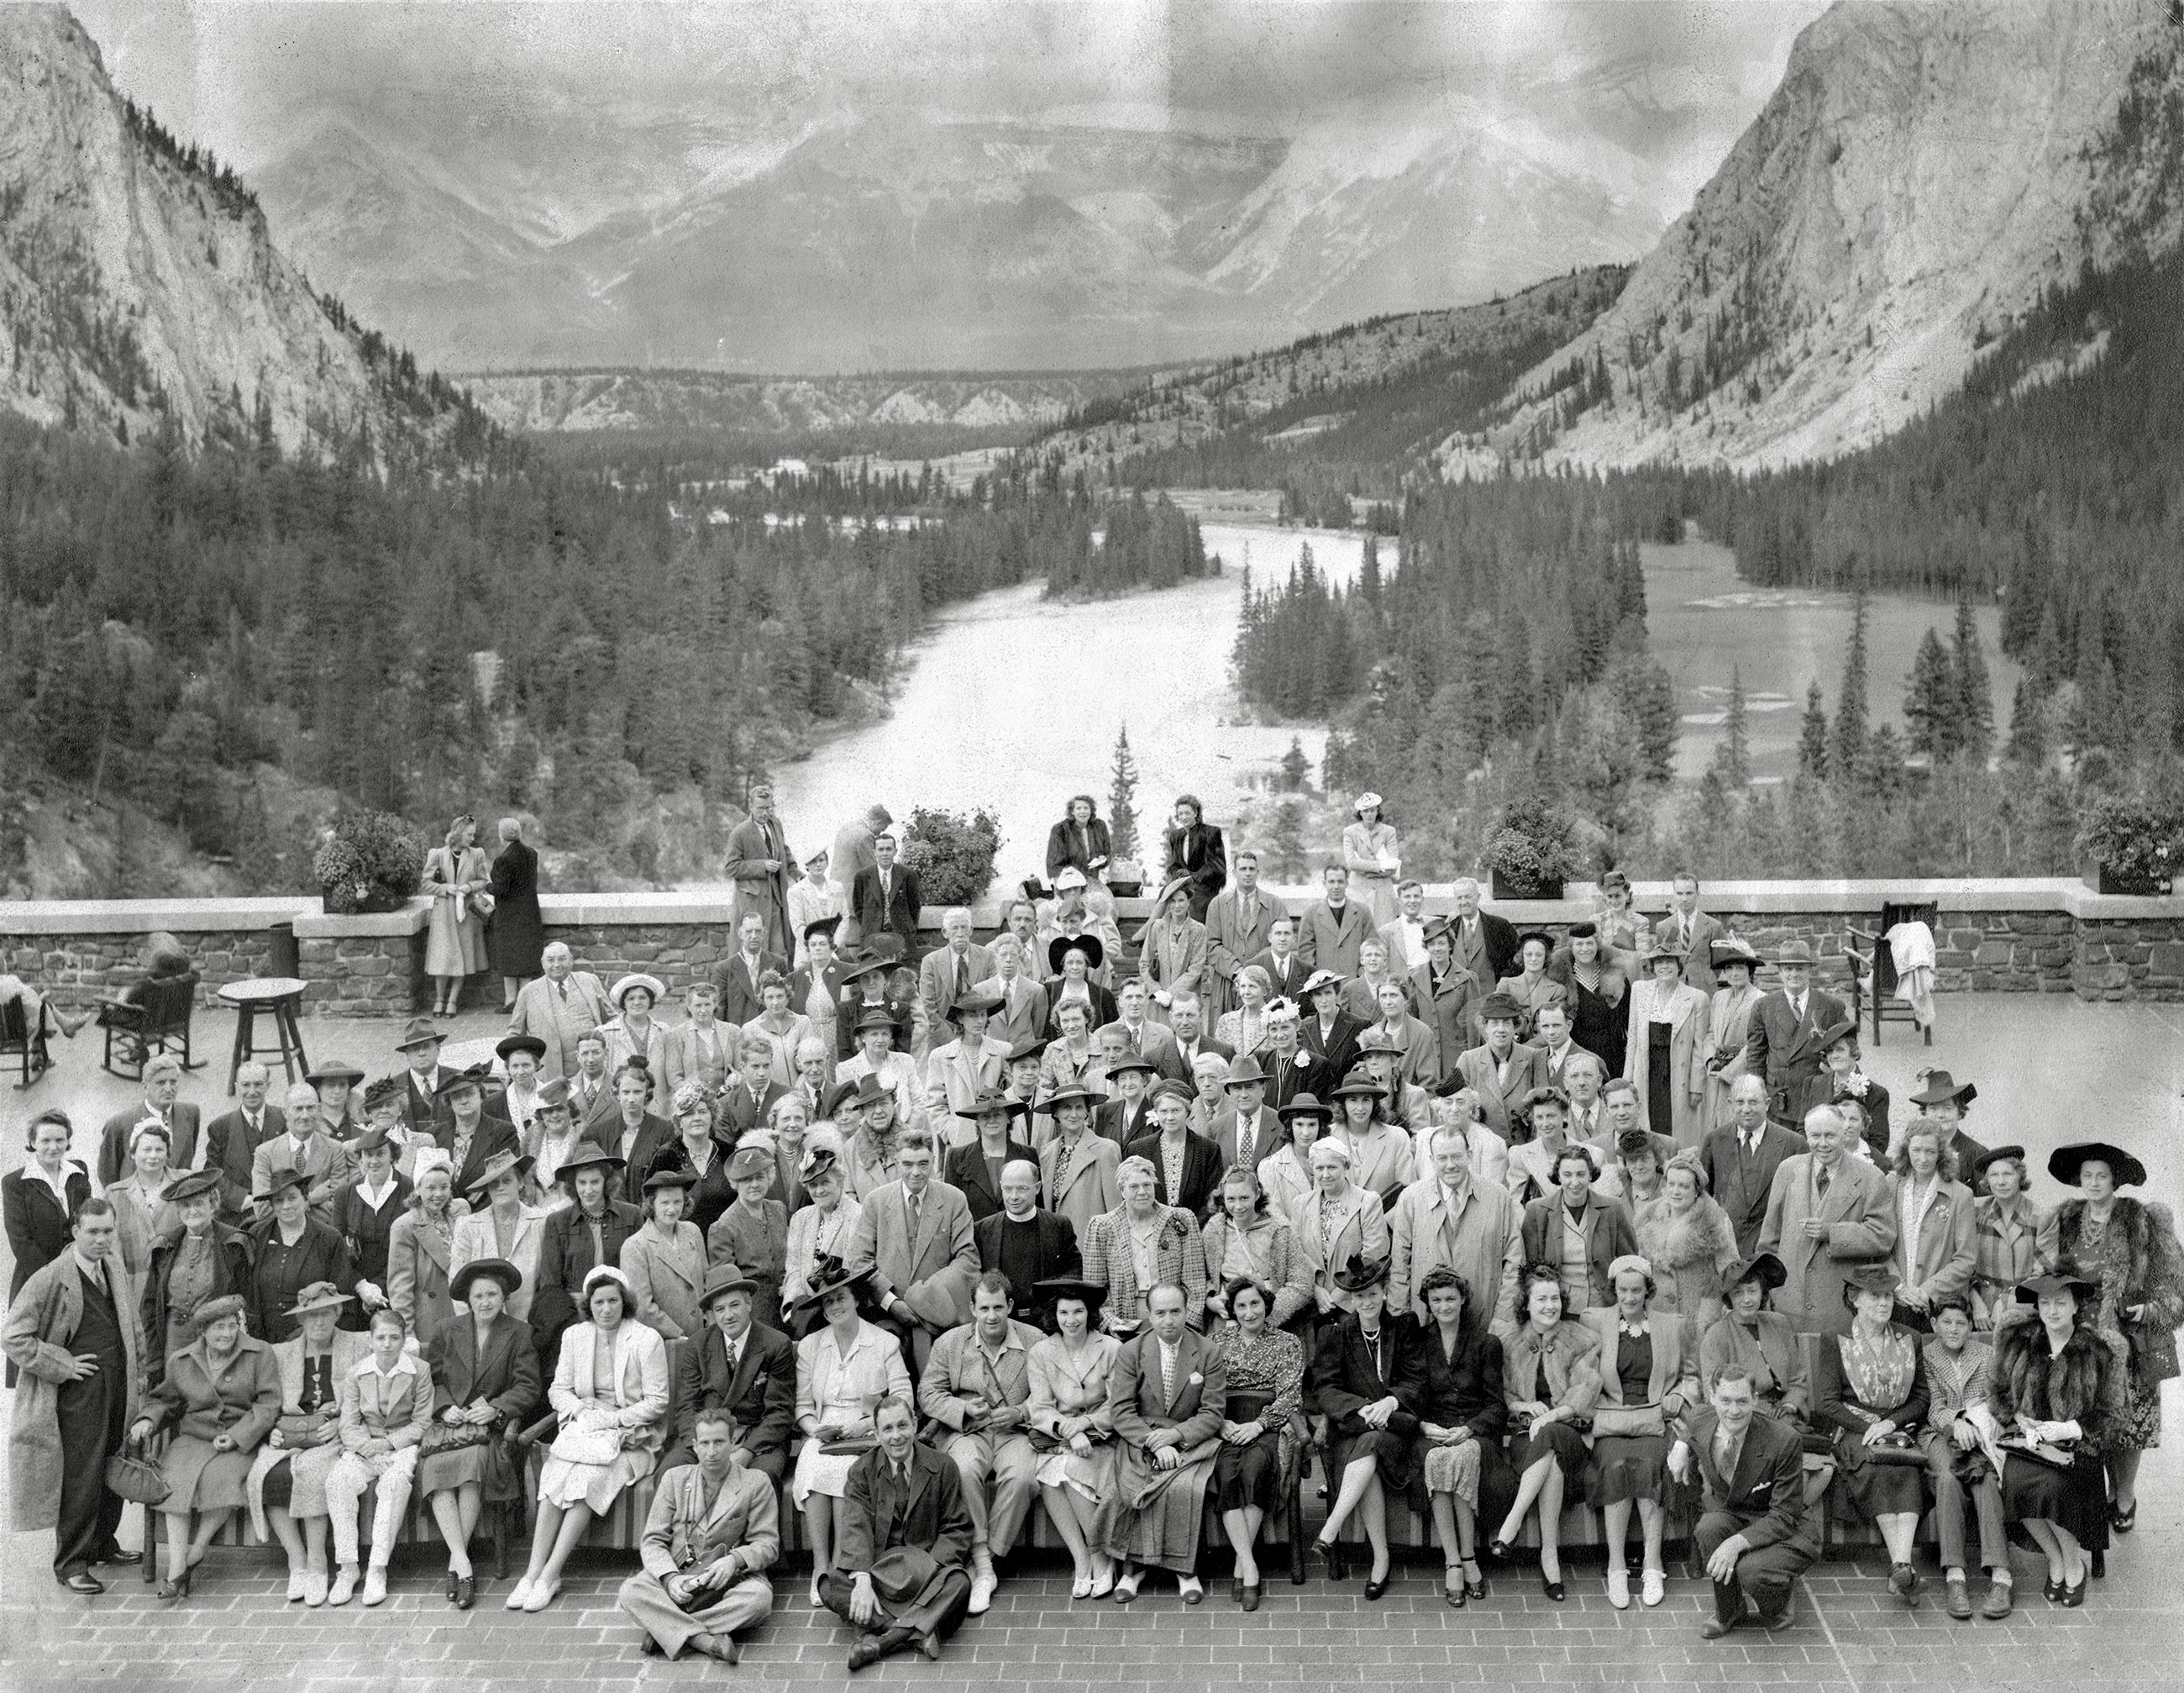 Photo stamped on back "Photograph by Associated Screen News Limited, Banff Springs Hotel, Banff, Alberta" with a handwritten "Sept. 1941" above. Original print measures 13 1/2 x 10 3/4 inches, with a hard-to-scan matte finish.

I did some minor digital cleaning (dust and creases) and converted from faded sepia to grey for better contrast. Found at a Northeast Ohio flea market in a box of old pictures and purchased for $1. It was simply an interesting pre-war photo with great scenery, people, and clothing; take special note of the John C. Reilly -like mug front and center. I bet he was a character! View full size.